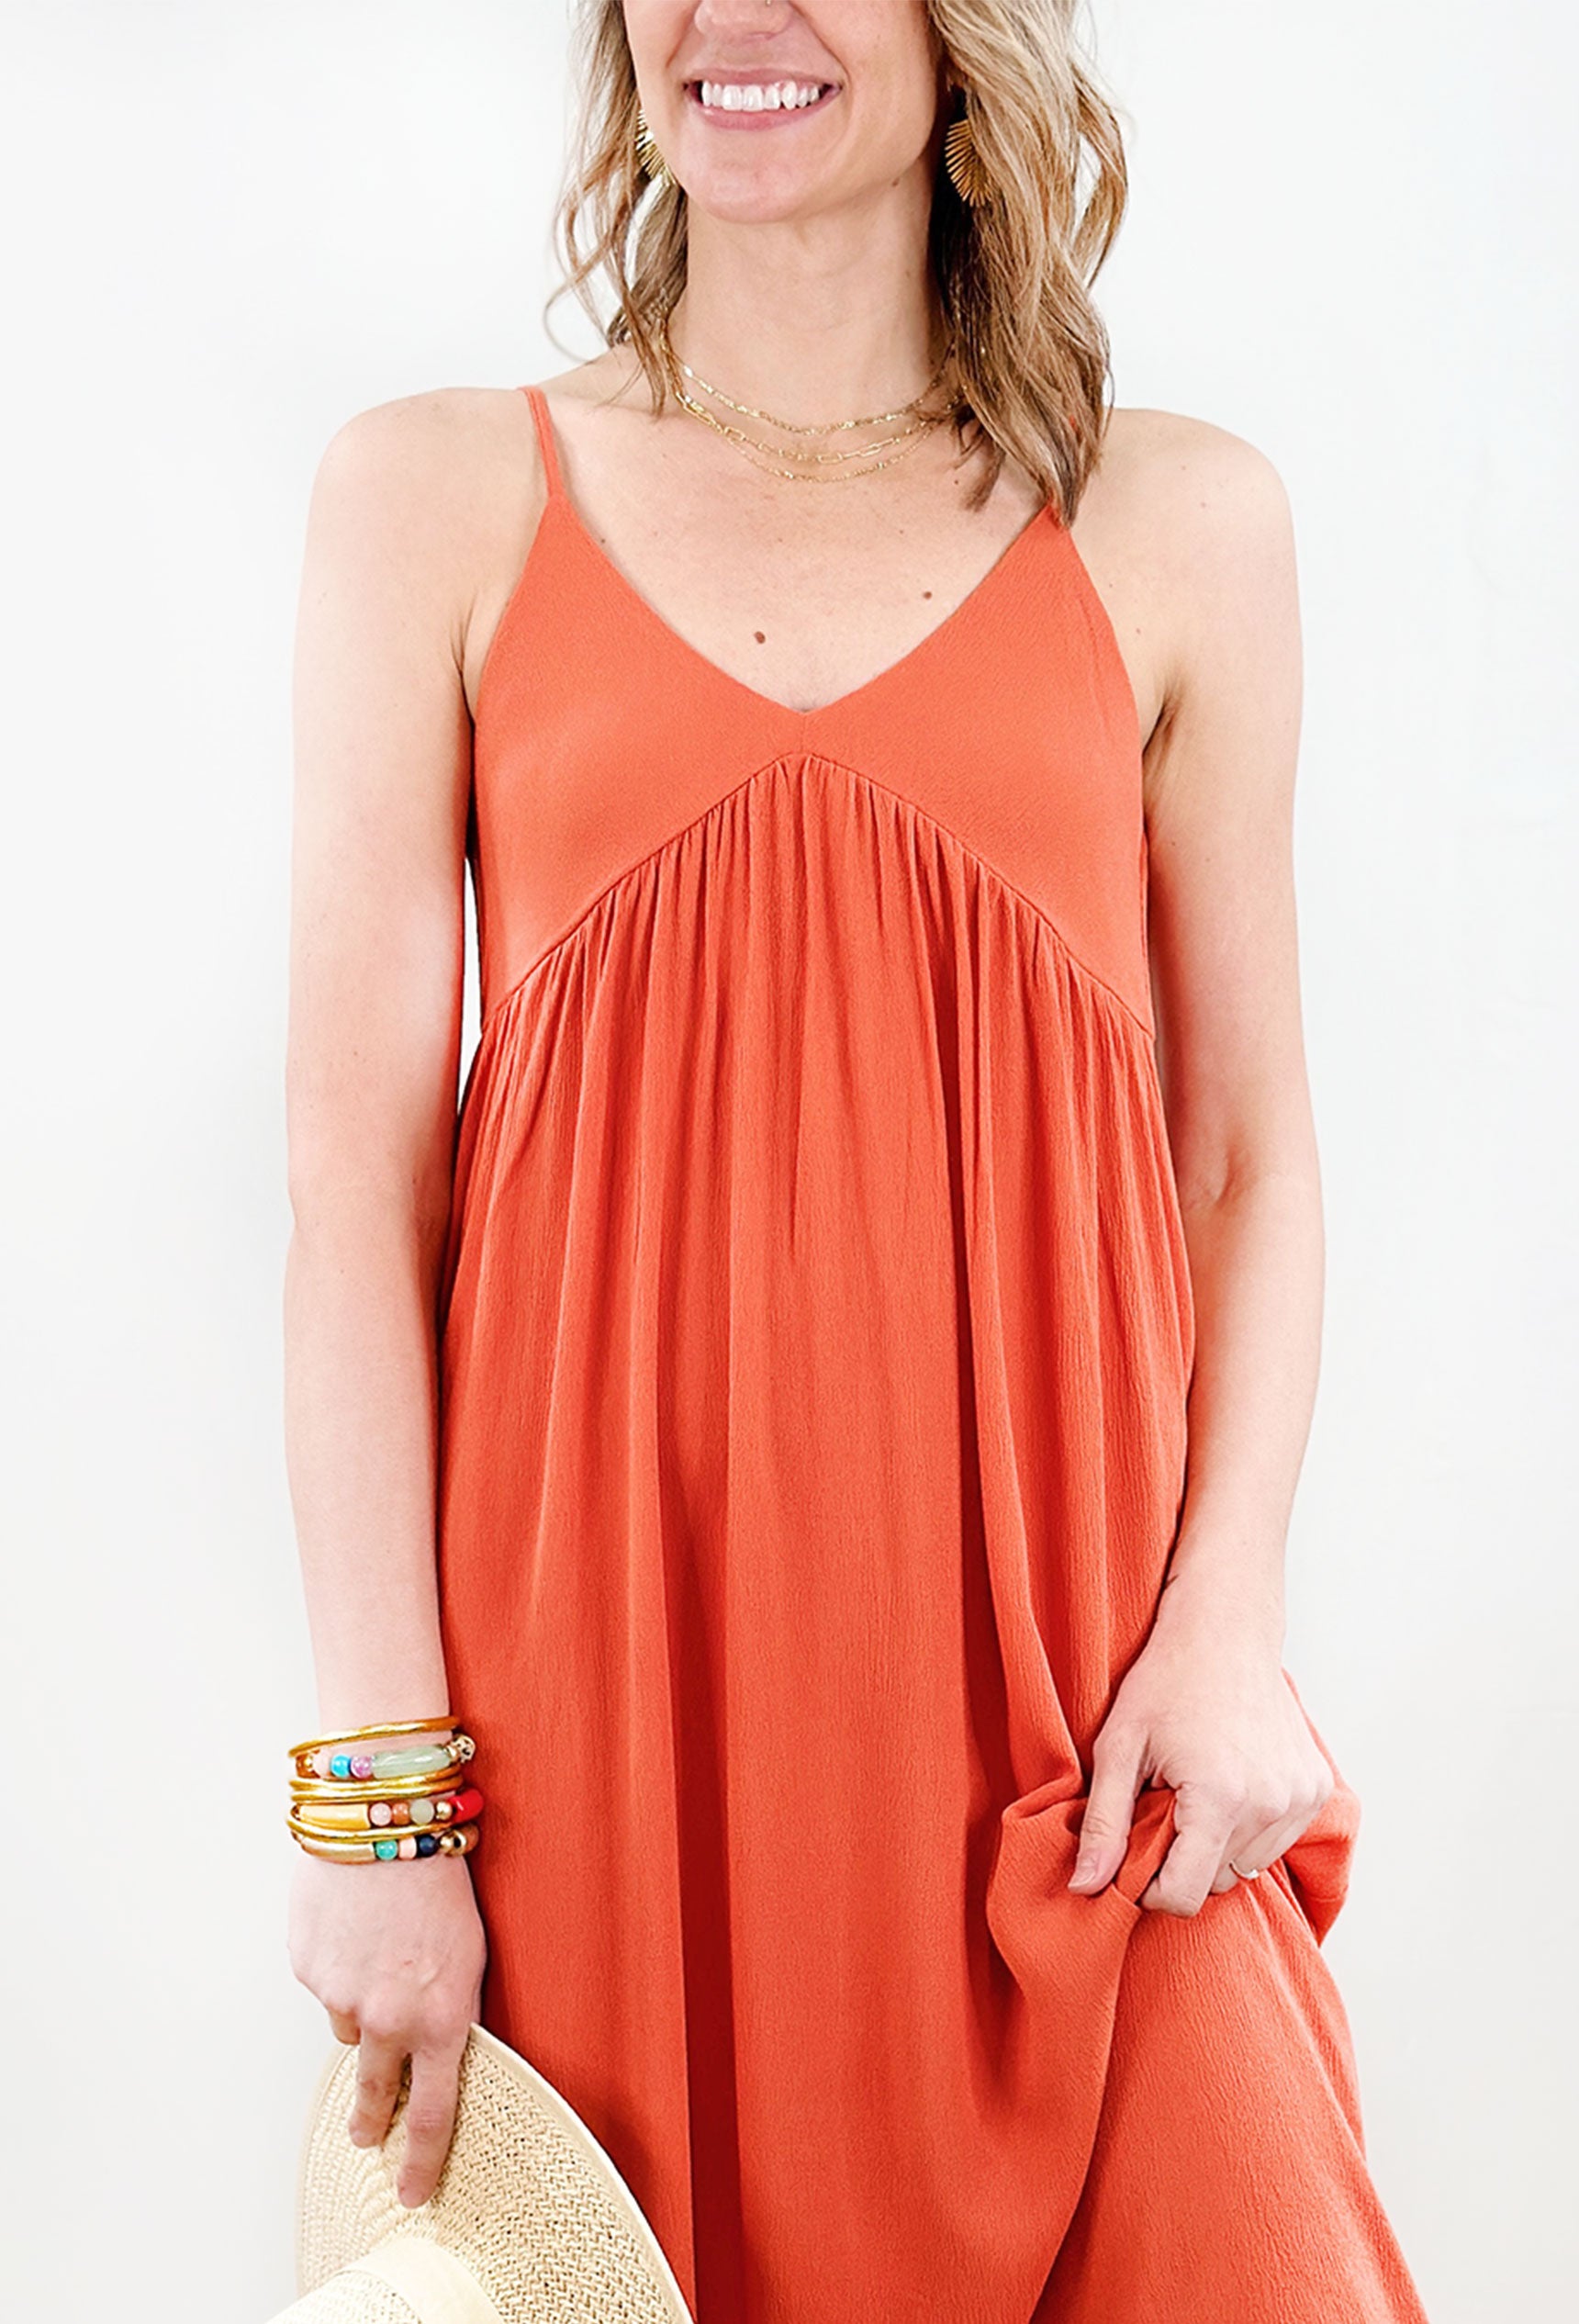 Reagan Midi Dress in Persimmon, Rust colored maxi dress with adjustable thin straps and a v neckline